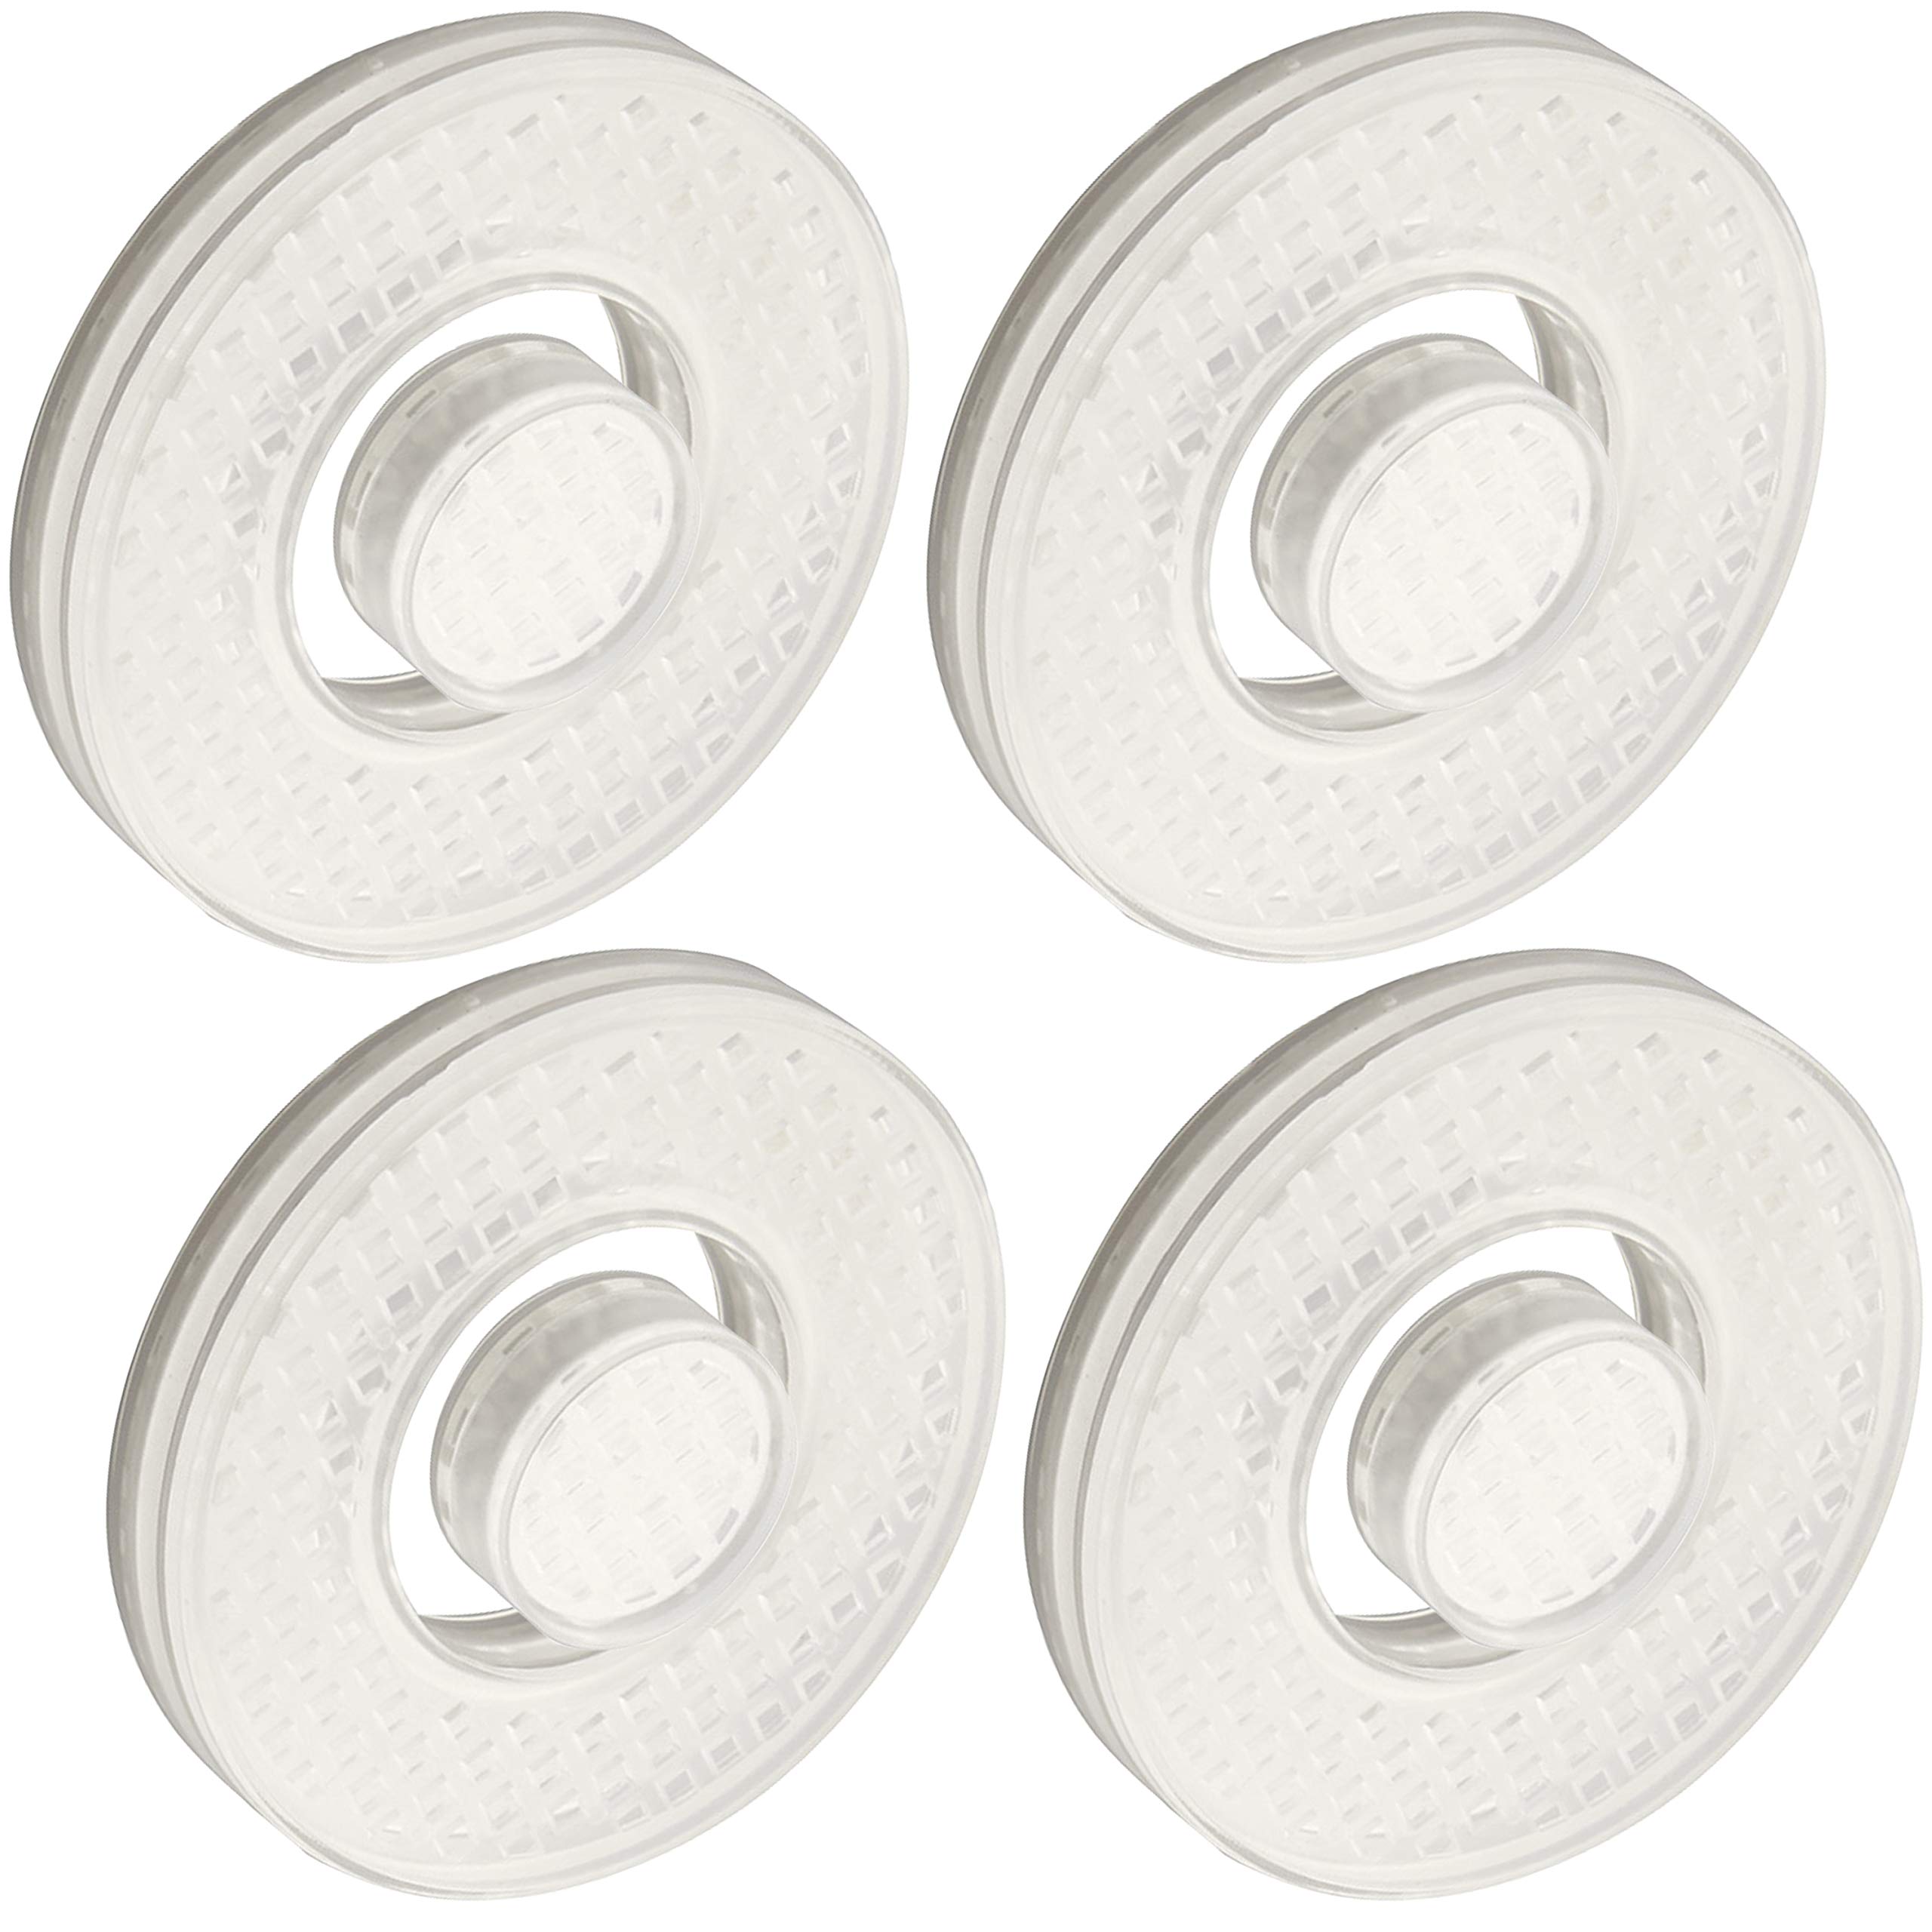 Dream Spa 4-piece Disk Filter Cartridge Replacement Set